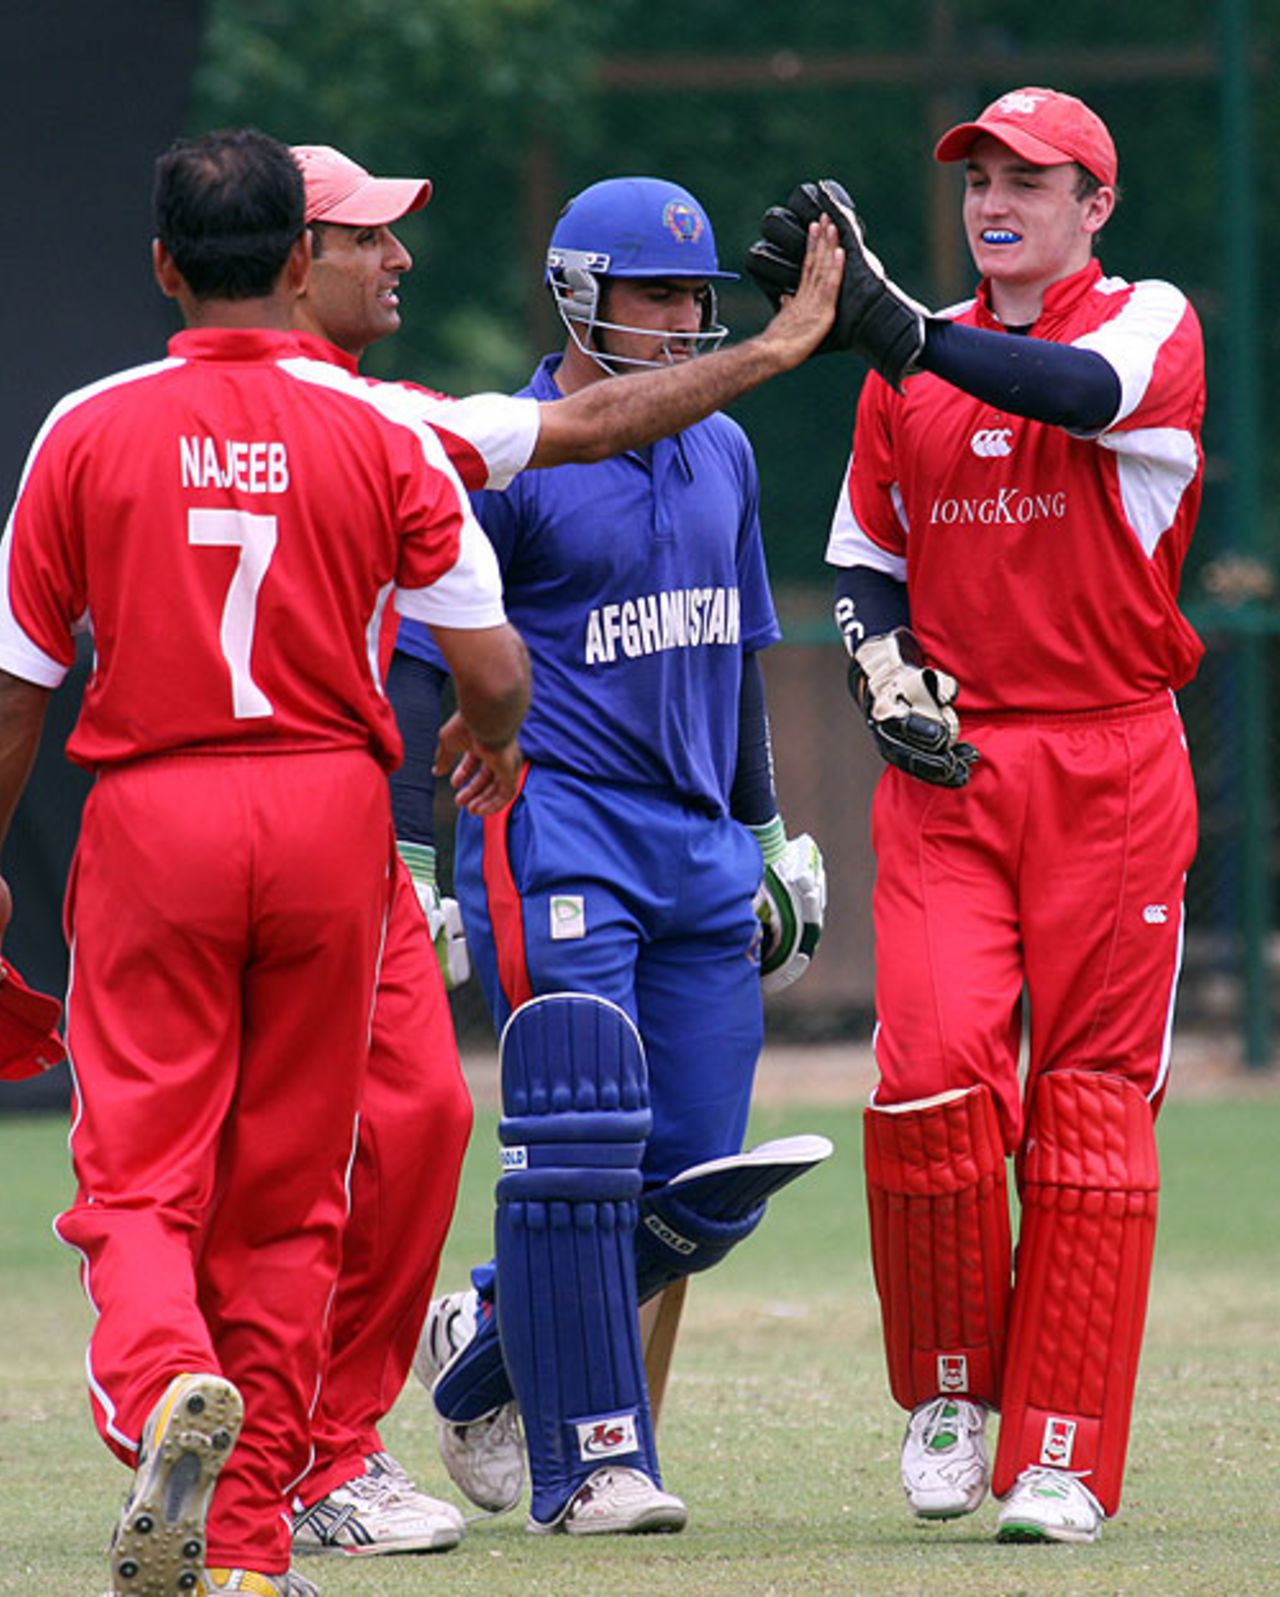 James Atkinson is congratulated after catching Samiullah, Afghanistan v Hong Kong, World Cricket League, Buenos Aires, January 25, 2009